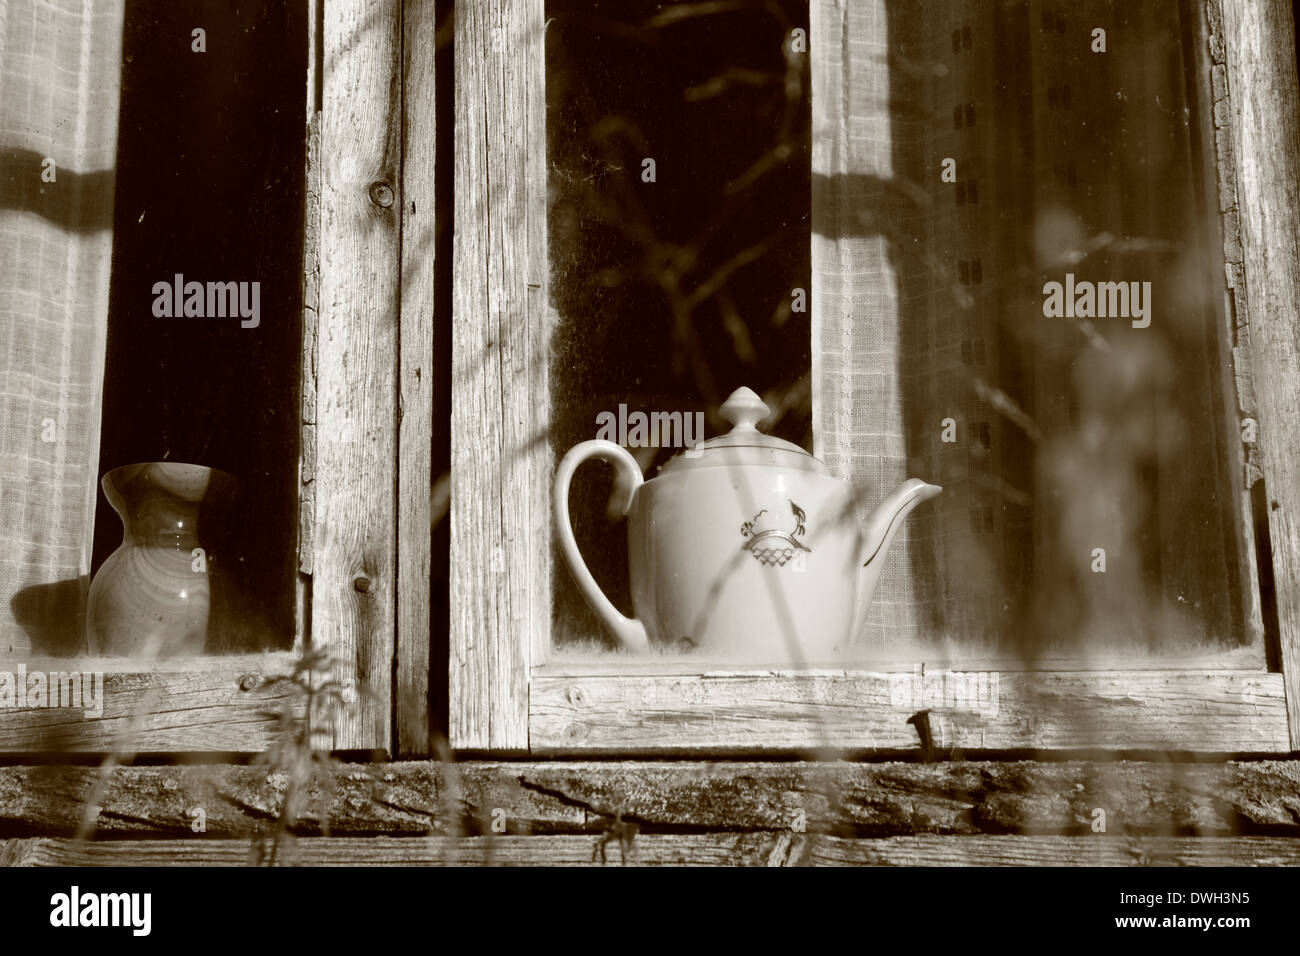 Coffee pot in the window of an old log-house. Black and white photograph, tinted sepia. Stock Photo